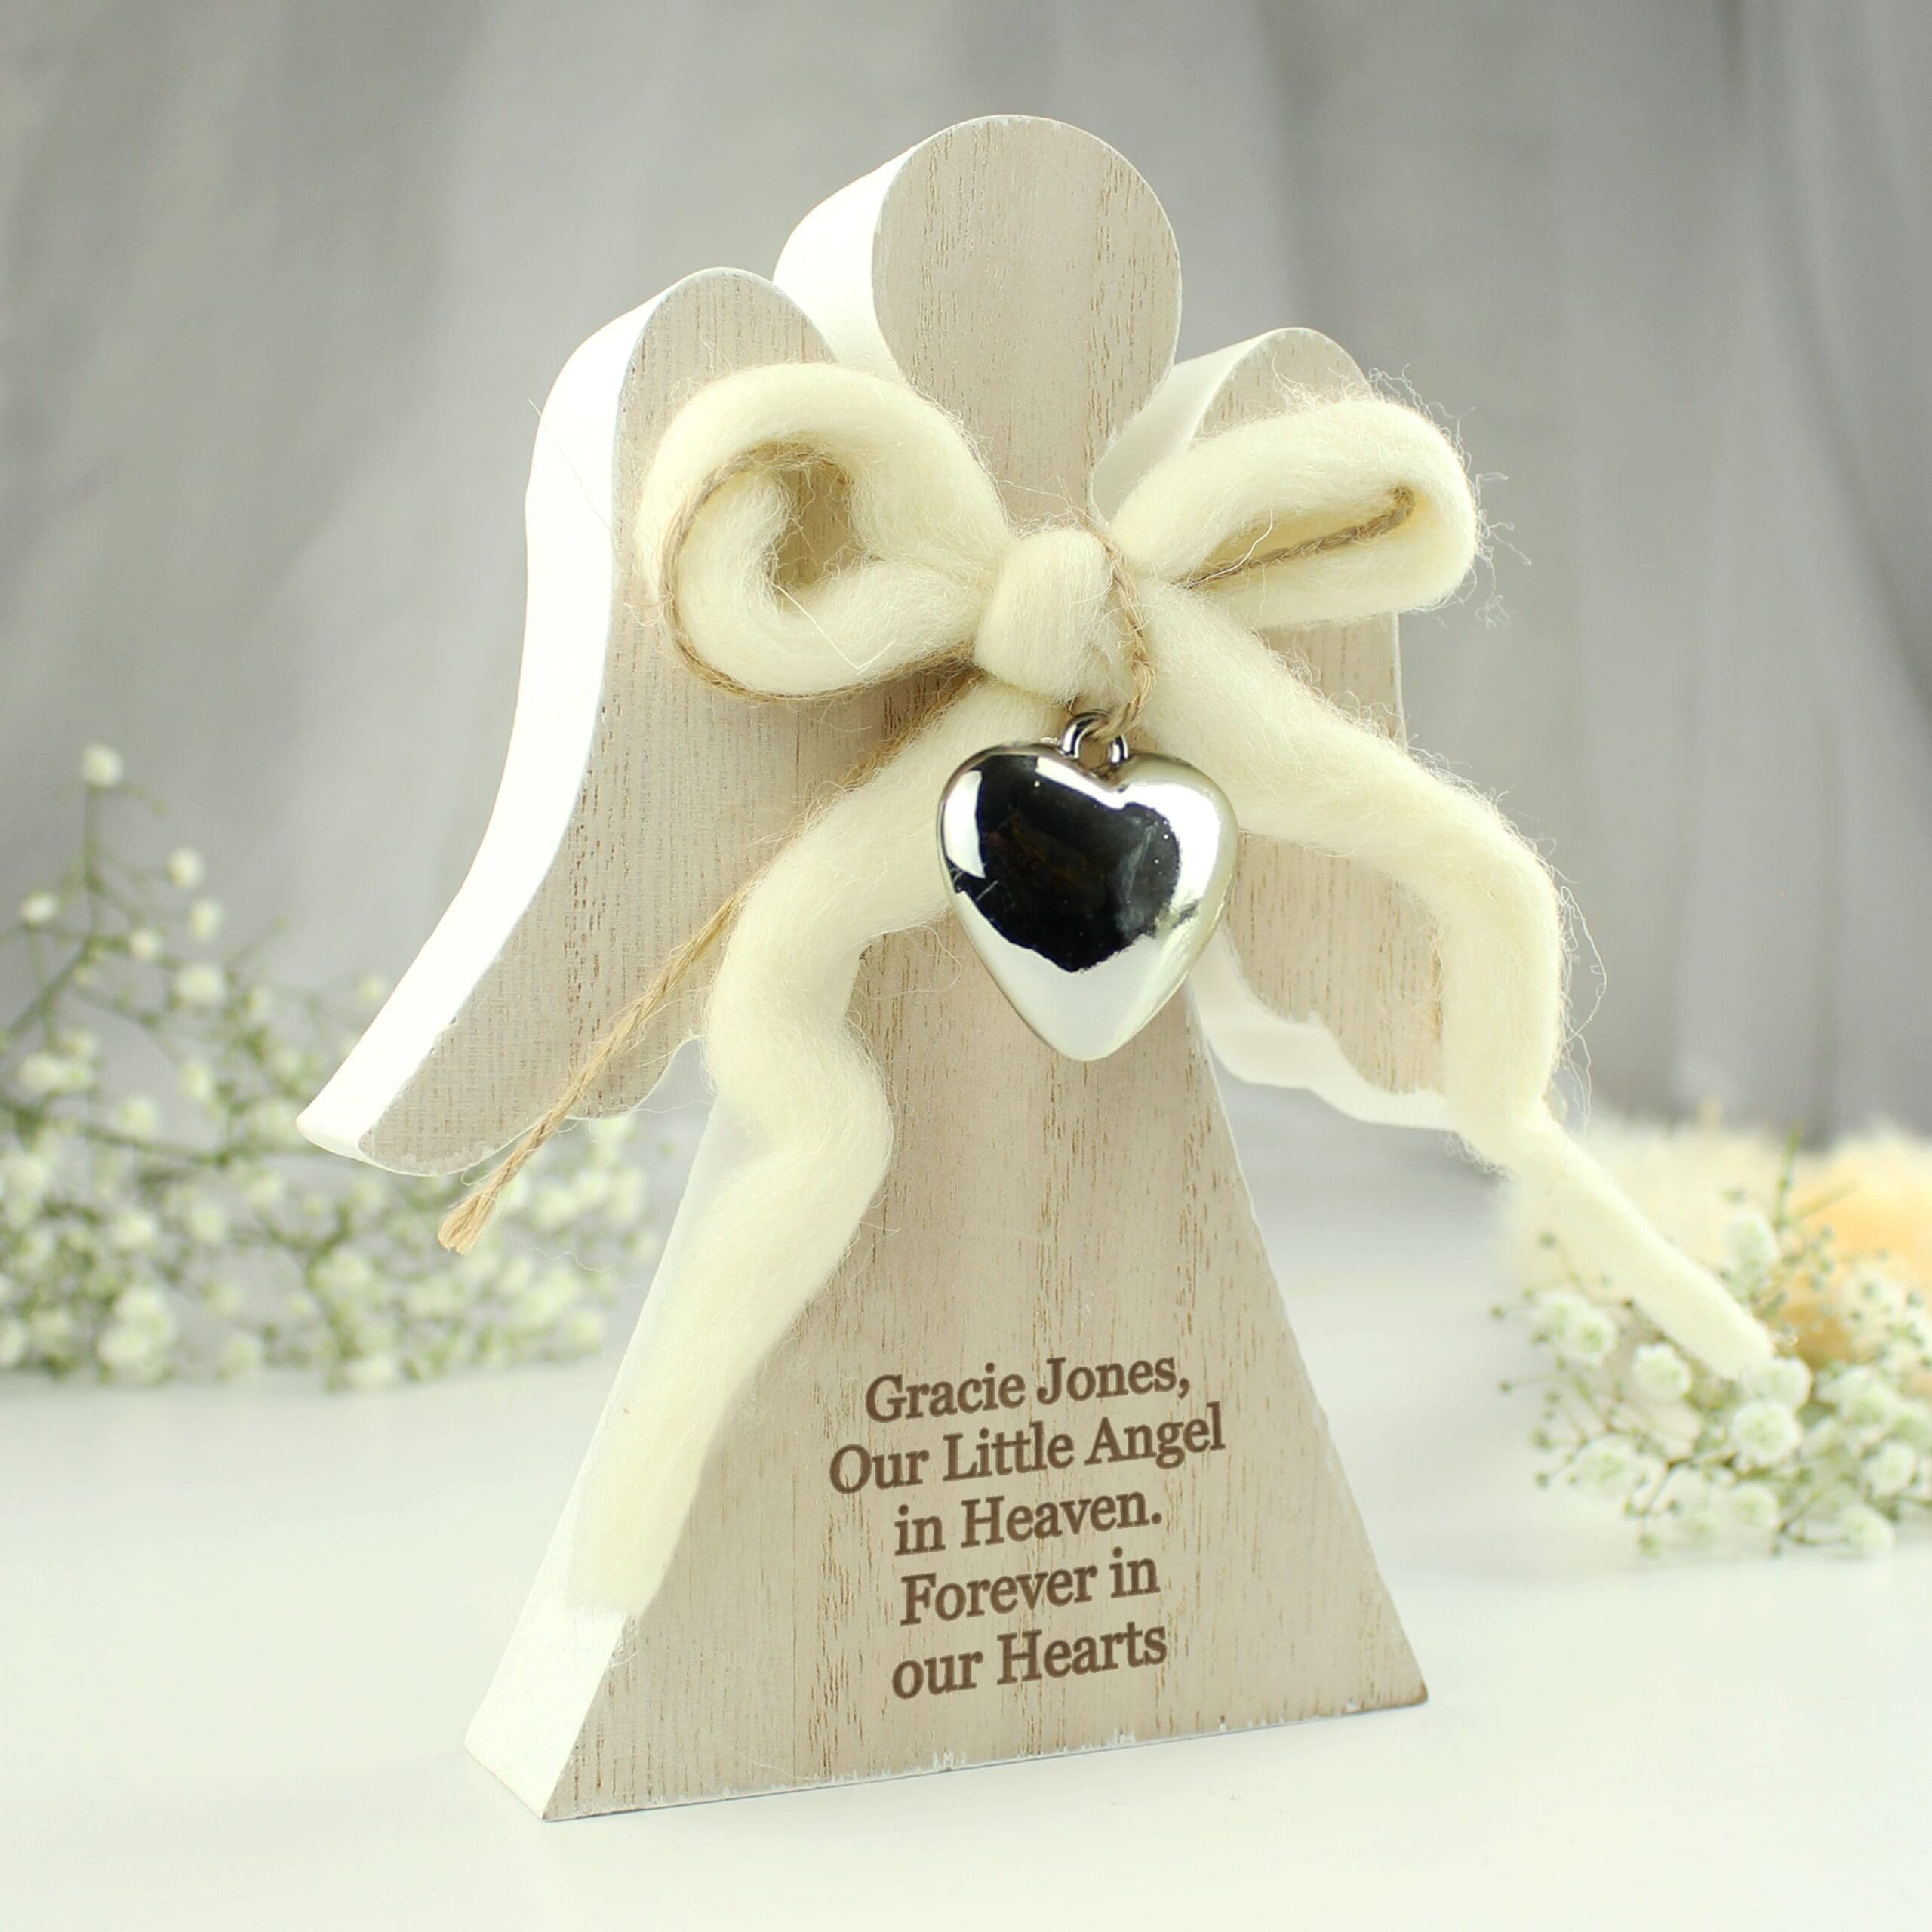 Personalised Rustic Wooden Angel Decoration